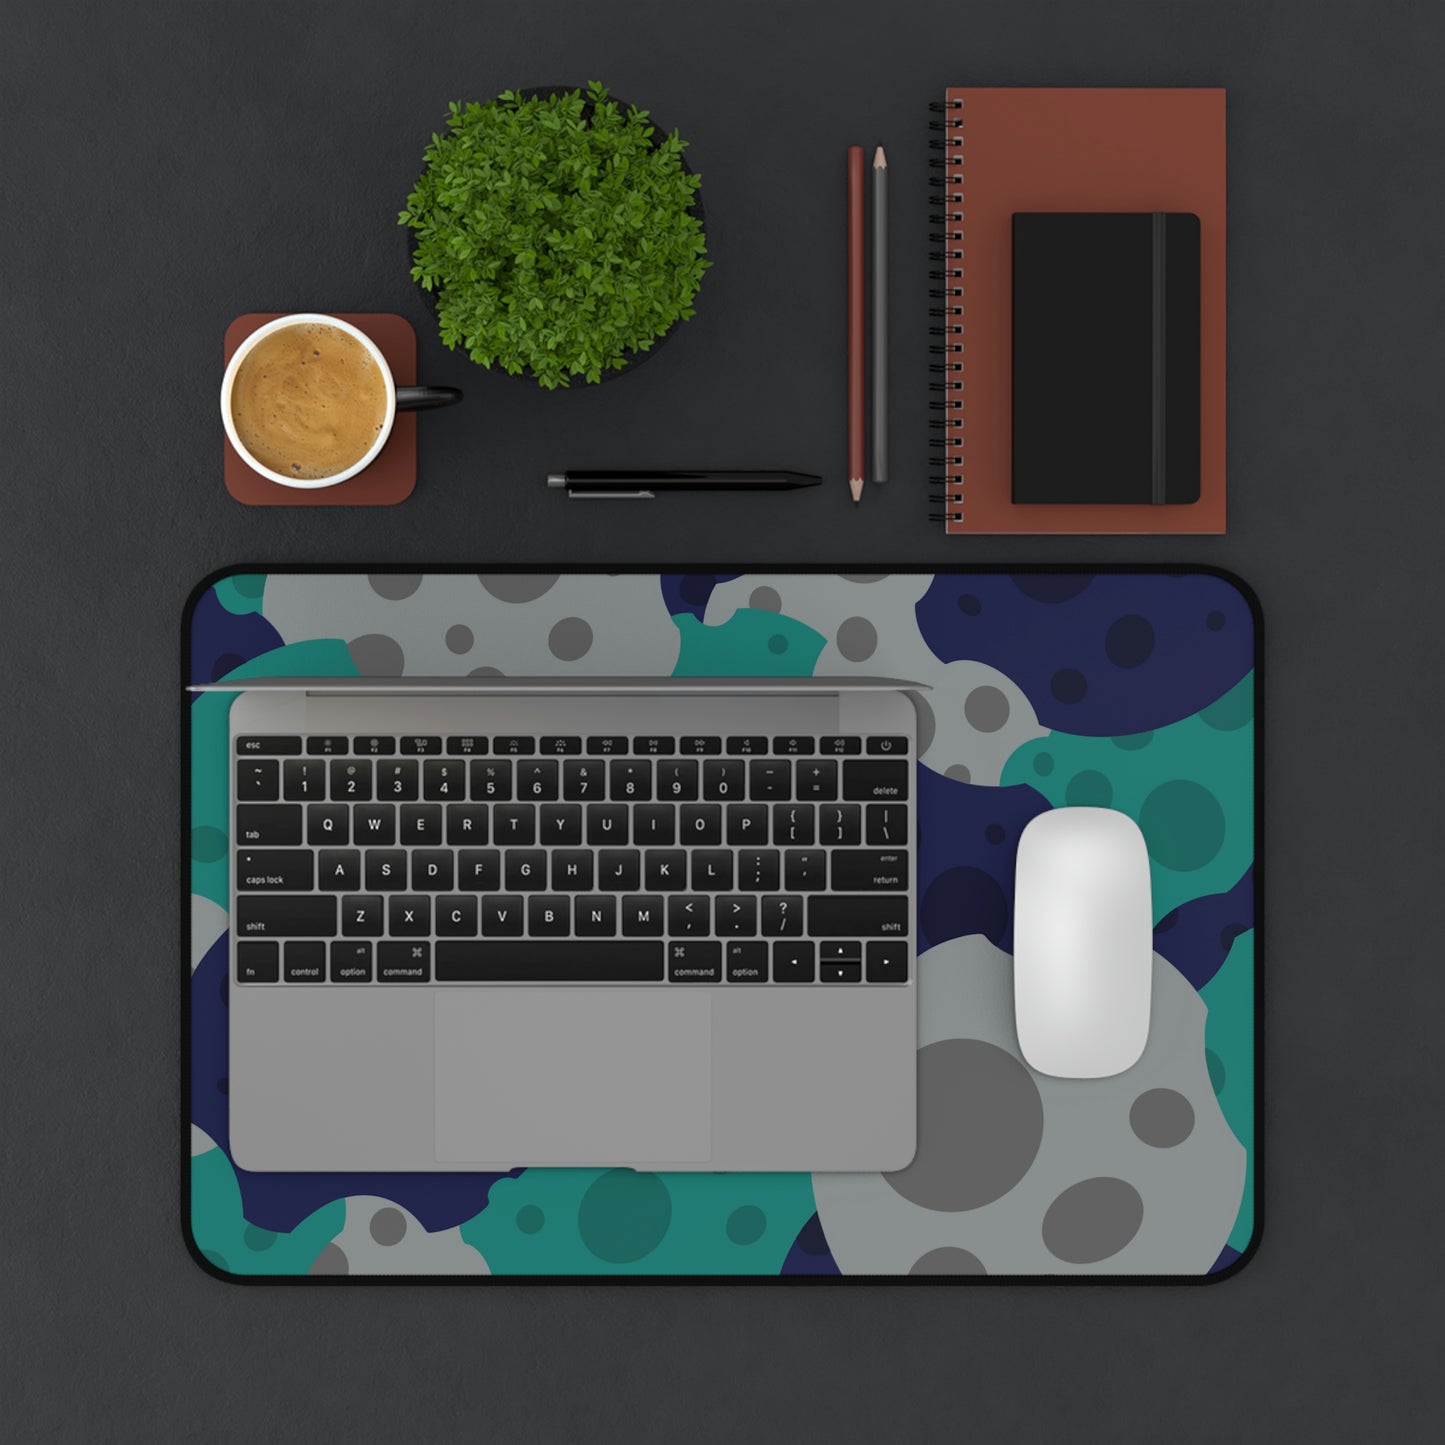 A 12" x 18" desk mat with gray, teal, and dark blue meteorites. A laptop and mouse sit on top of it.